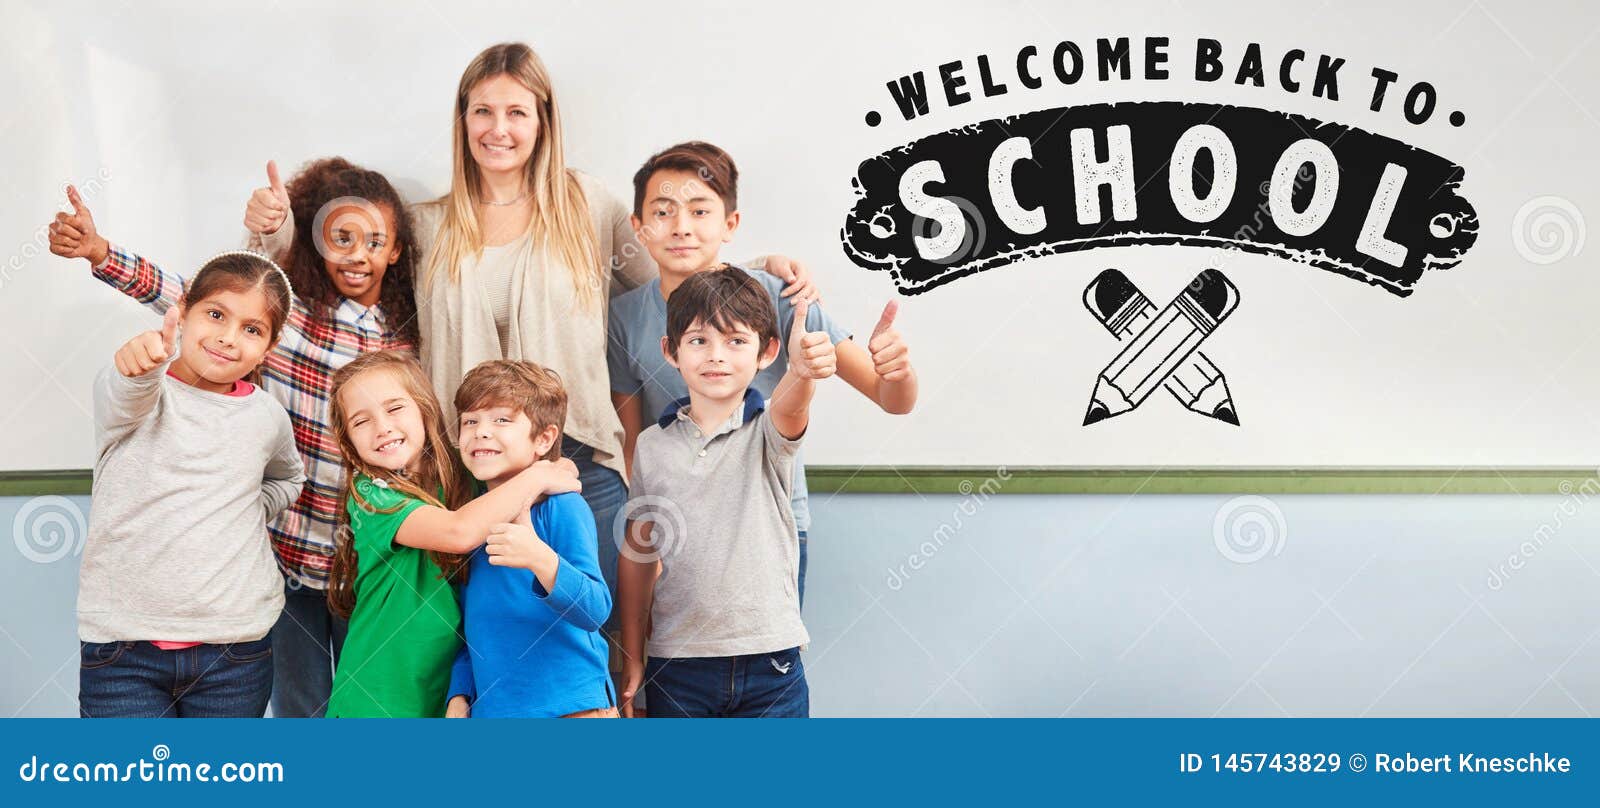 4 406 Welcome Back To School Photos Free Royalty Free Stock Photos From Dreamstime